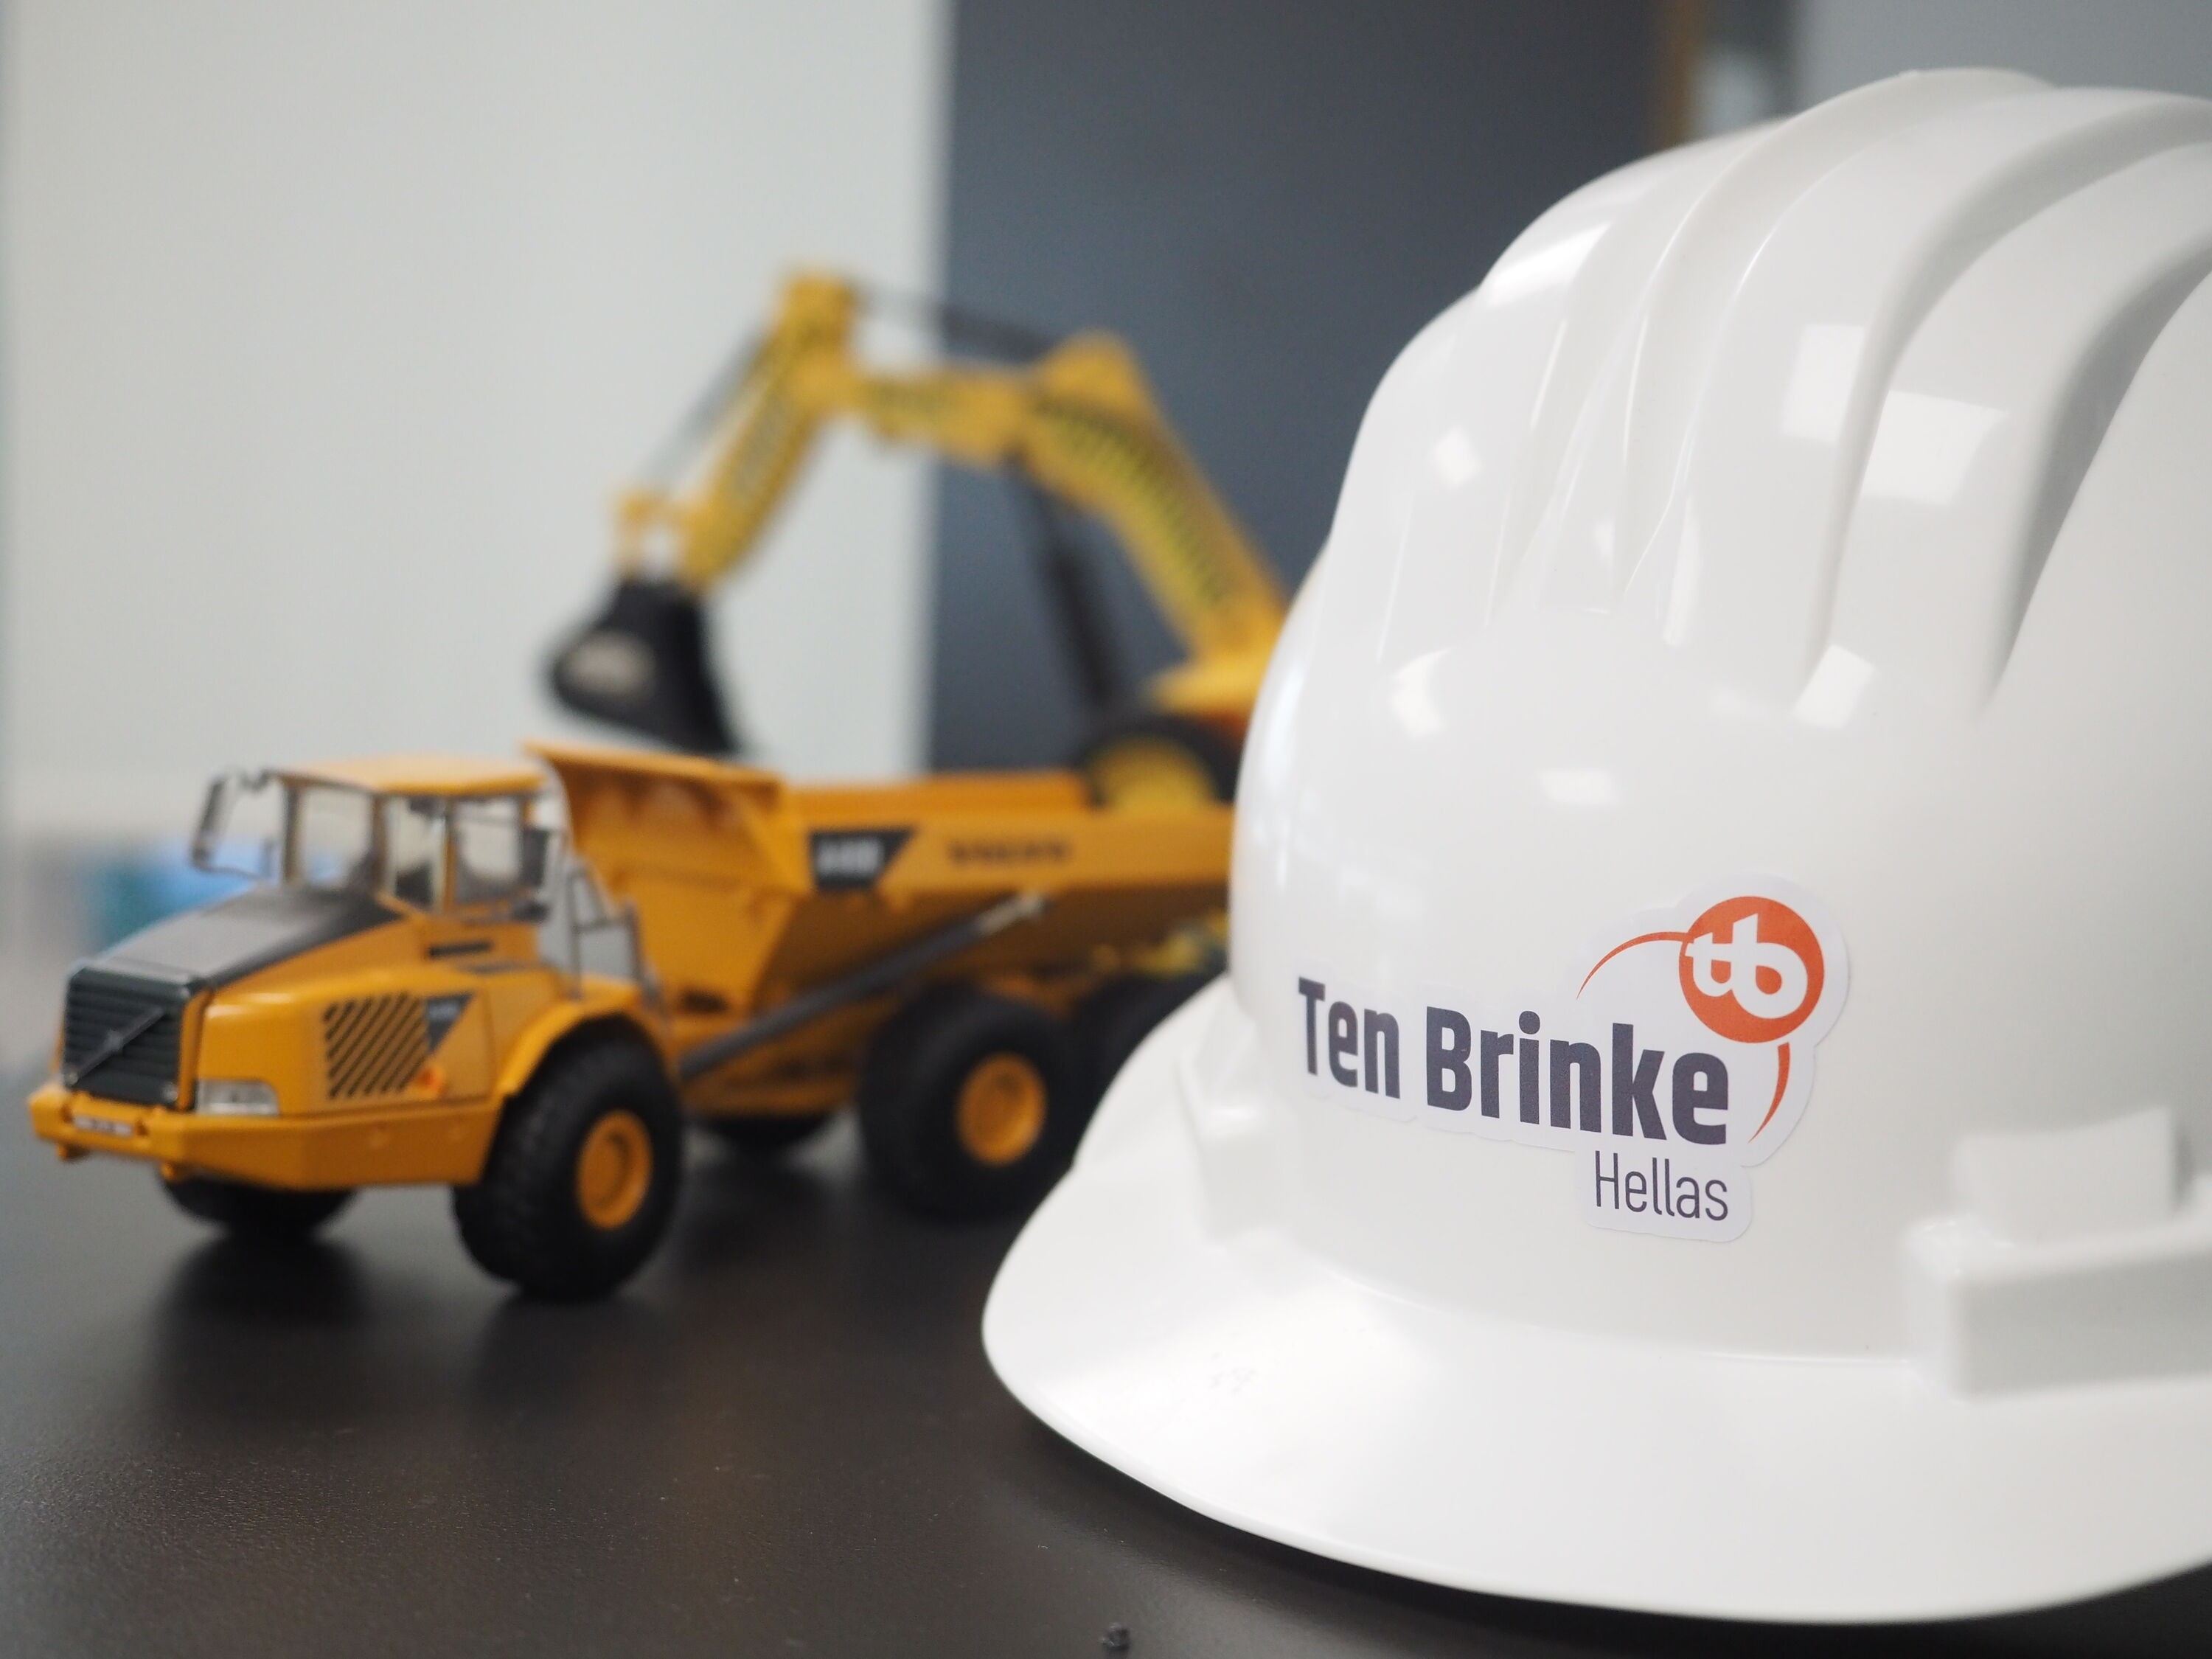 Ten Brinke's turnover in Greece is estimated at € 300 million